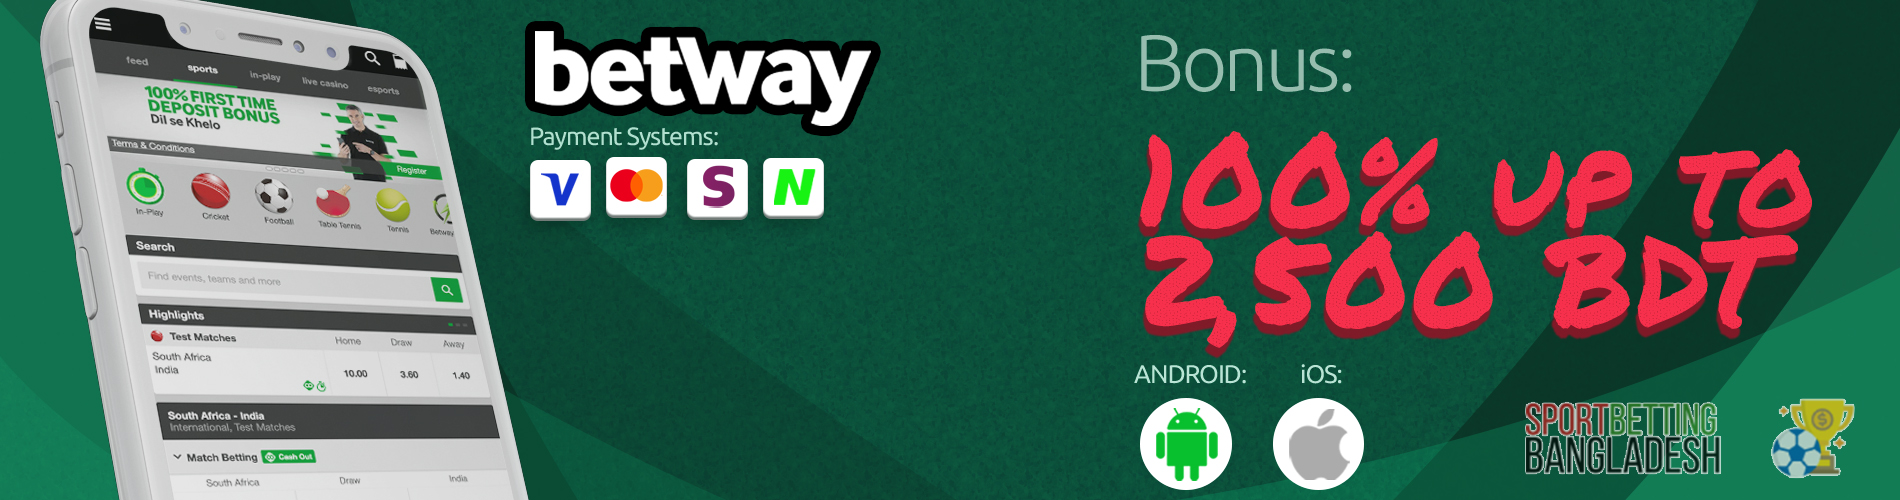 Betway Bangladesh app: payment systems, available platforms, welcome bonus.